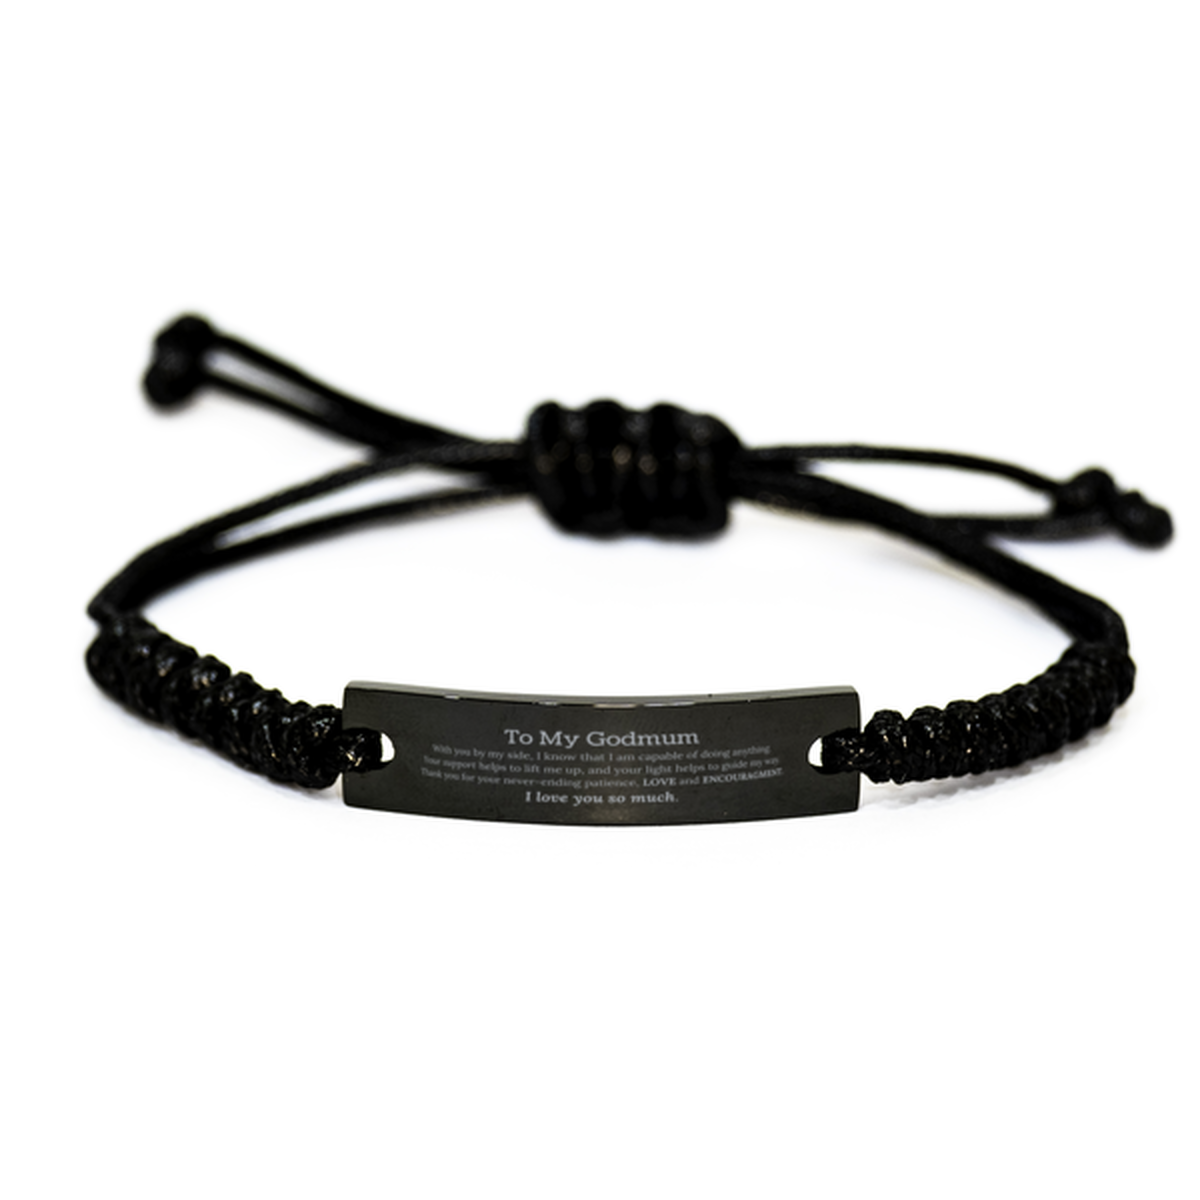 Appreciation Godmum Black Rope Bracelet Gifts, To My Godmum Birthday Christmas Wedding Keepsake Gifts for Godmum With you by my side, I know that I am capable of doing anything. I love you so much